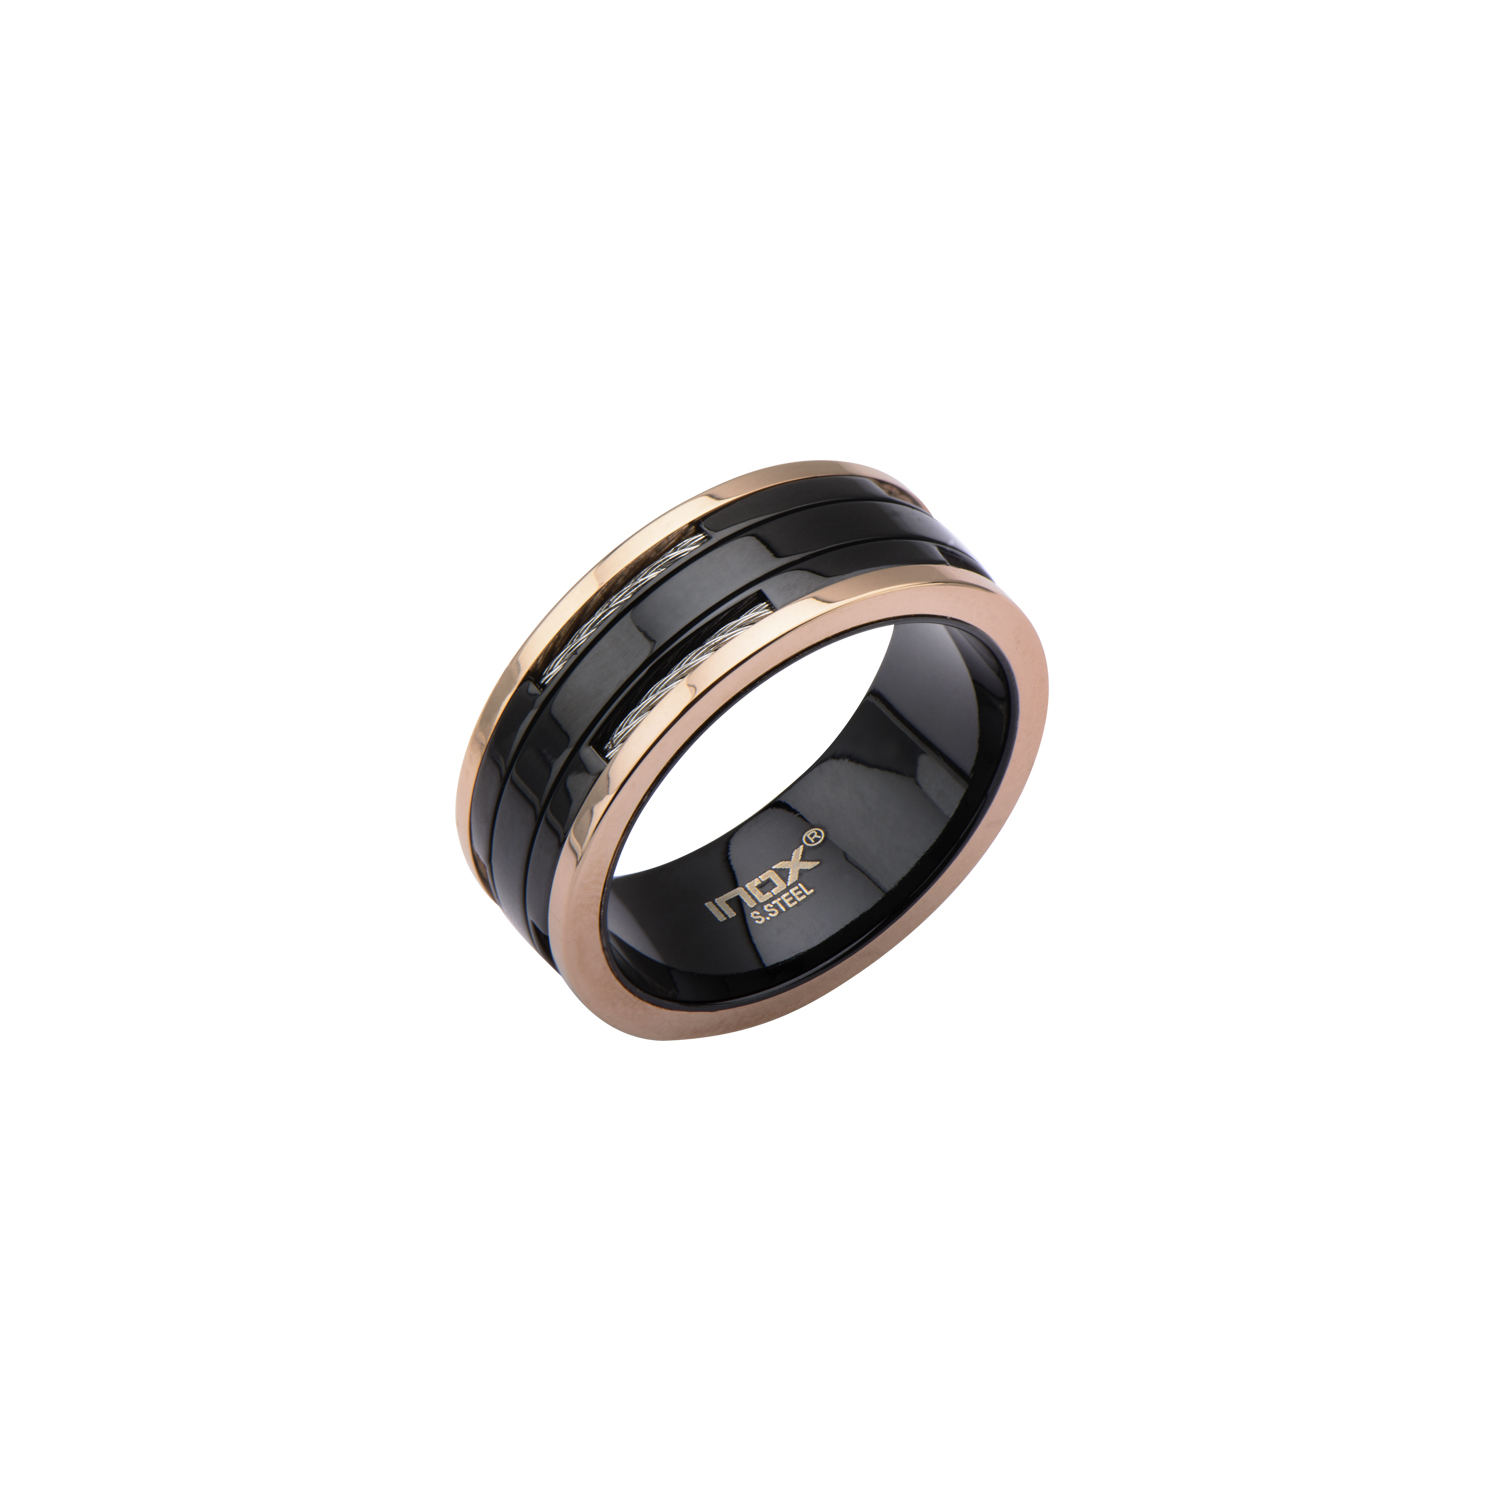 Black Plated and Rose Gold Plated Ring with Inlayed Cable K. Martin Jeweler Dodge City, KS